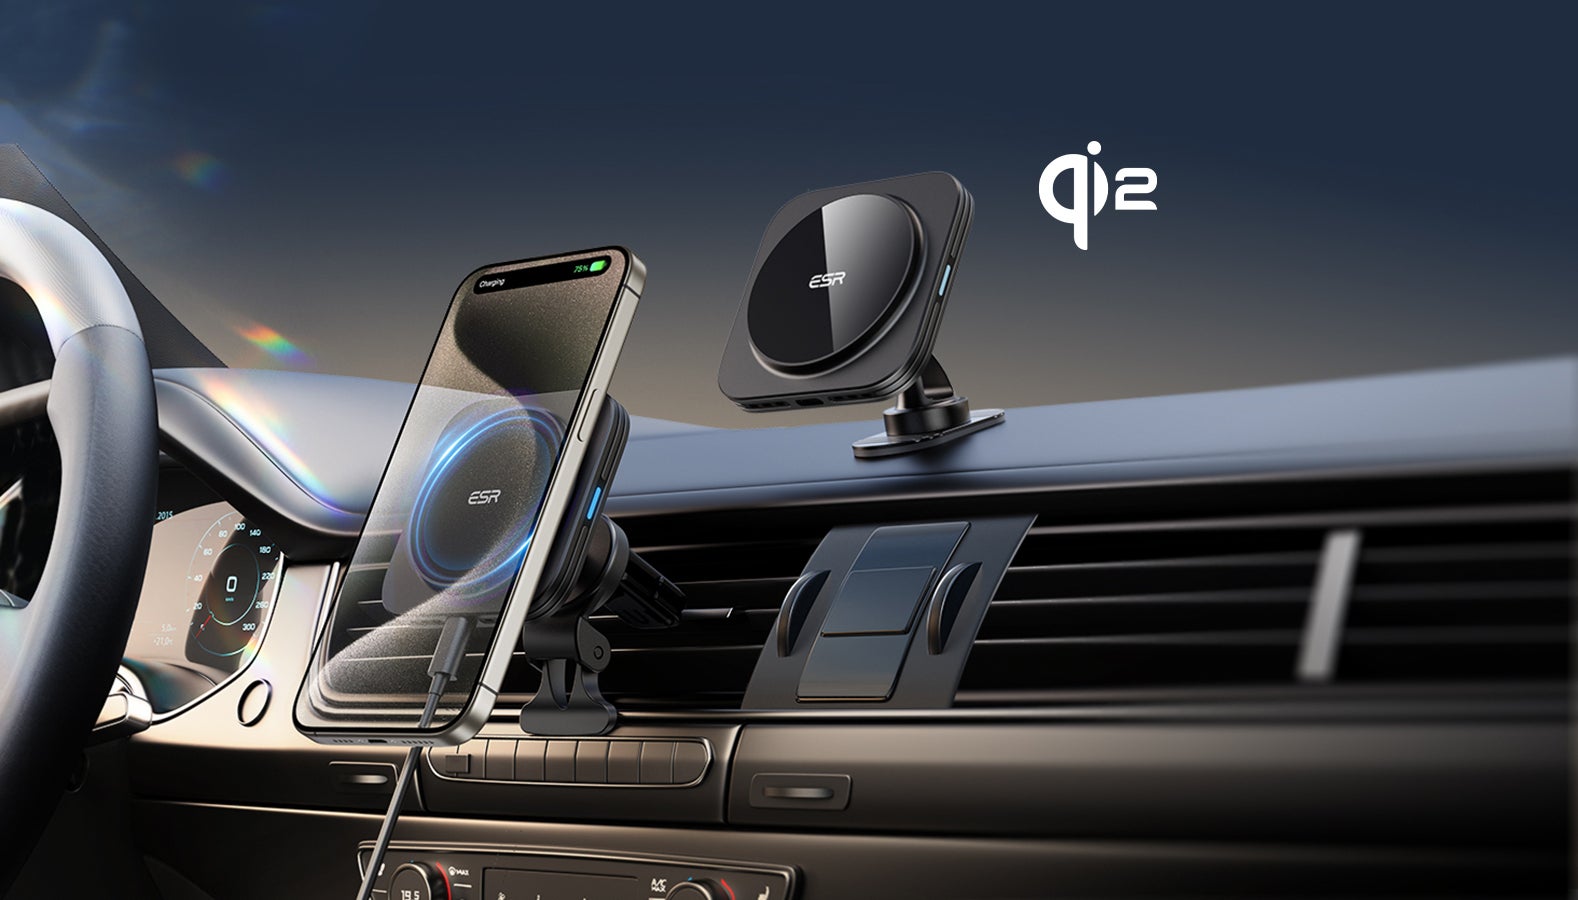 Qi2 Magnetic Wireless Car Charger